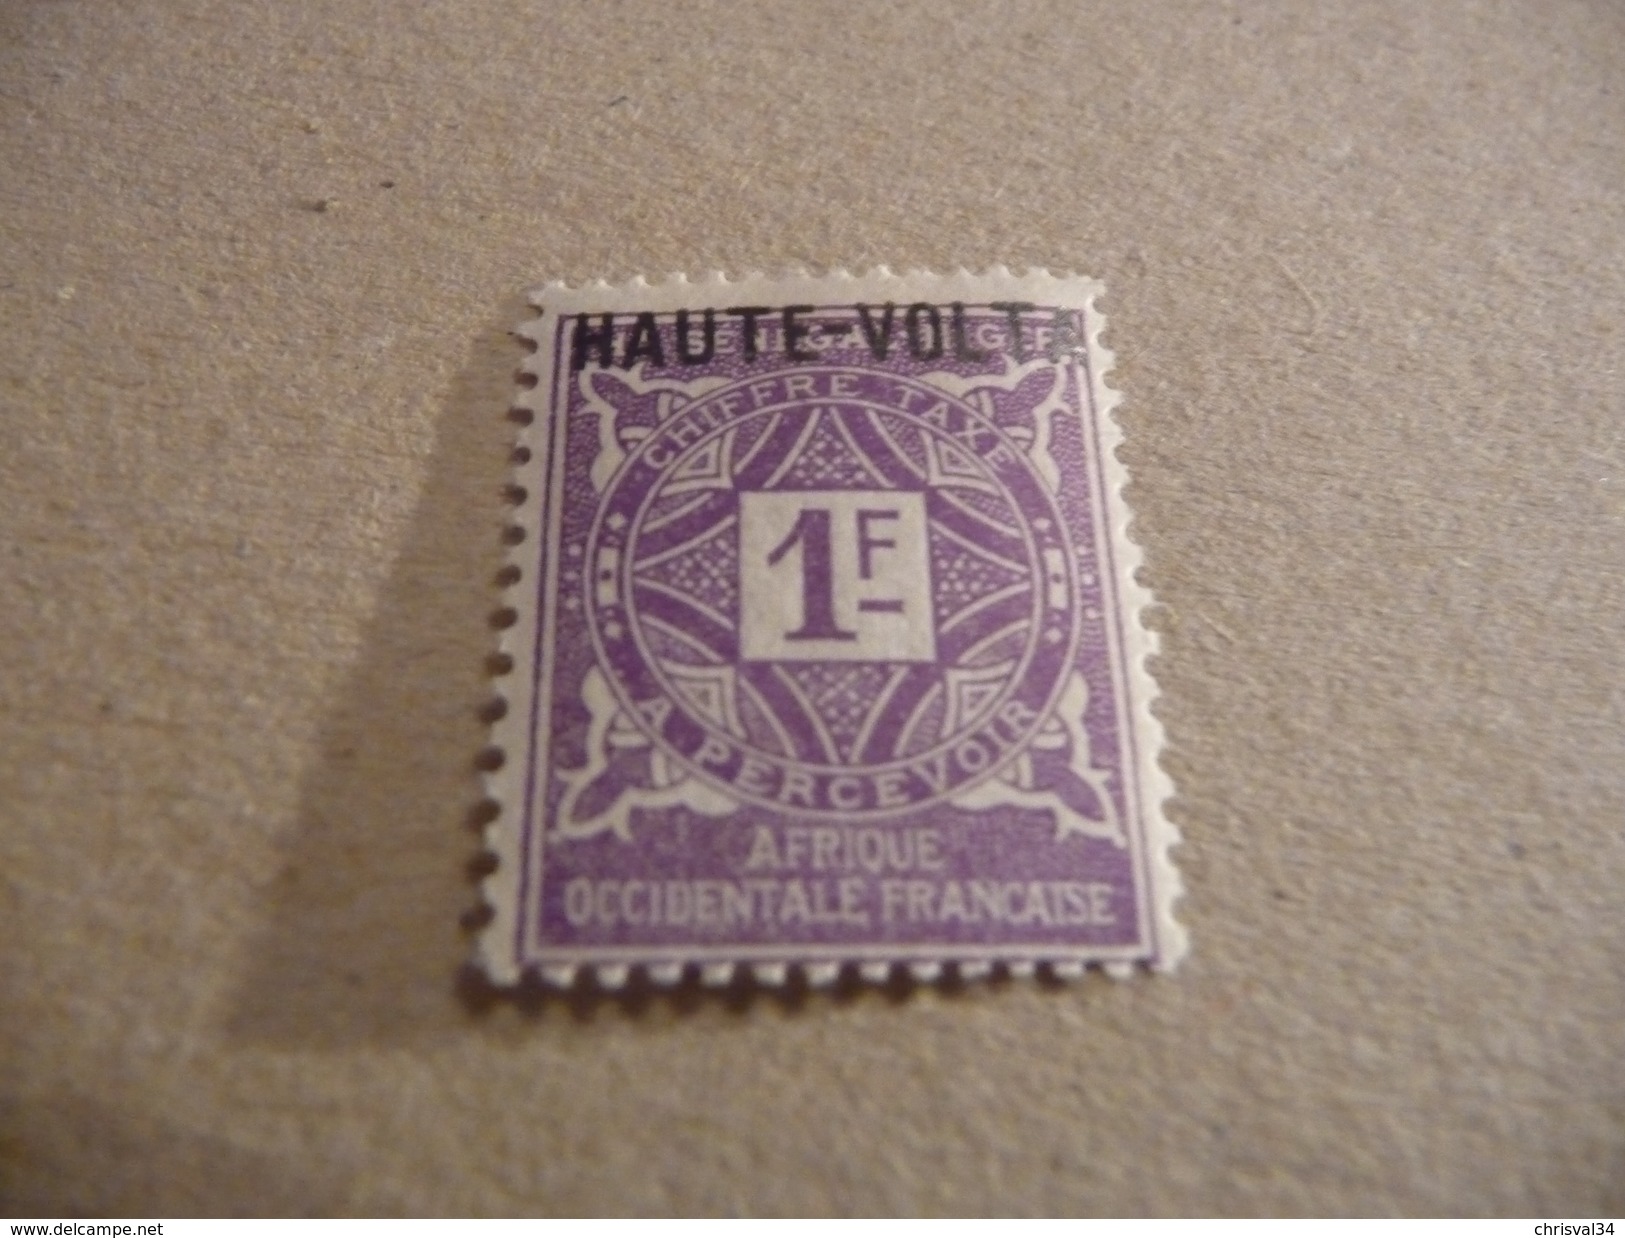 TIMBRE   HAUTE-VOLTA   TAXE  N  18      COTE  8,00  EUROS   NEUF  TRACE  CHARNIERE - Postage Due